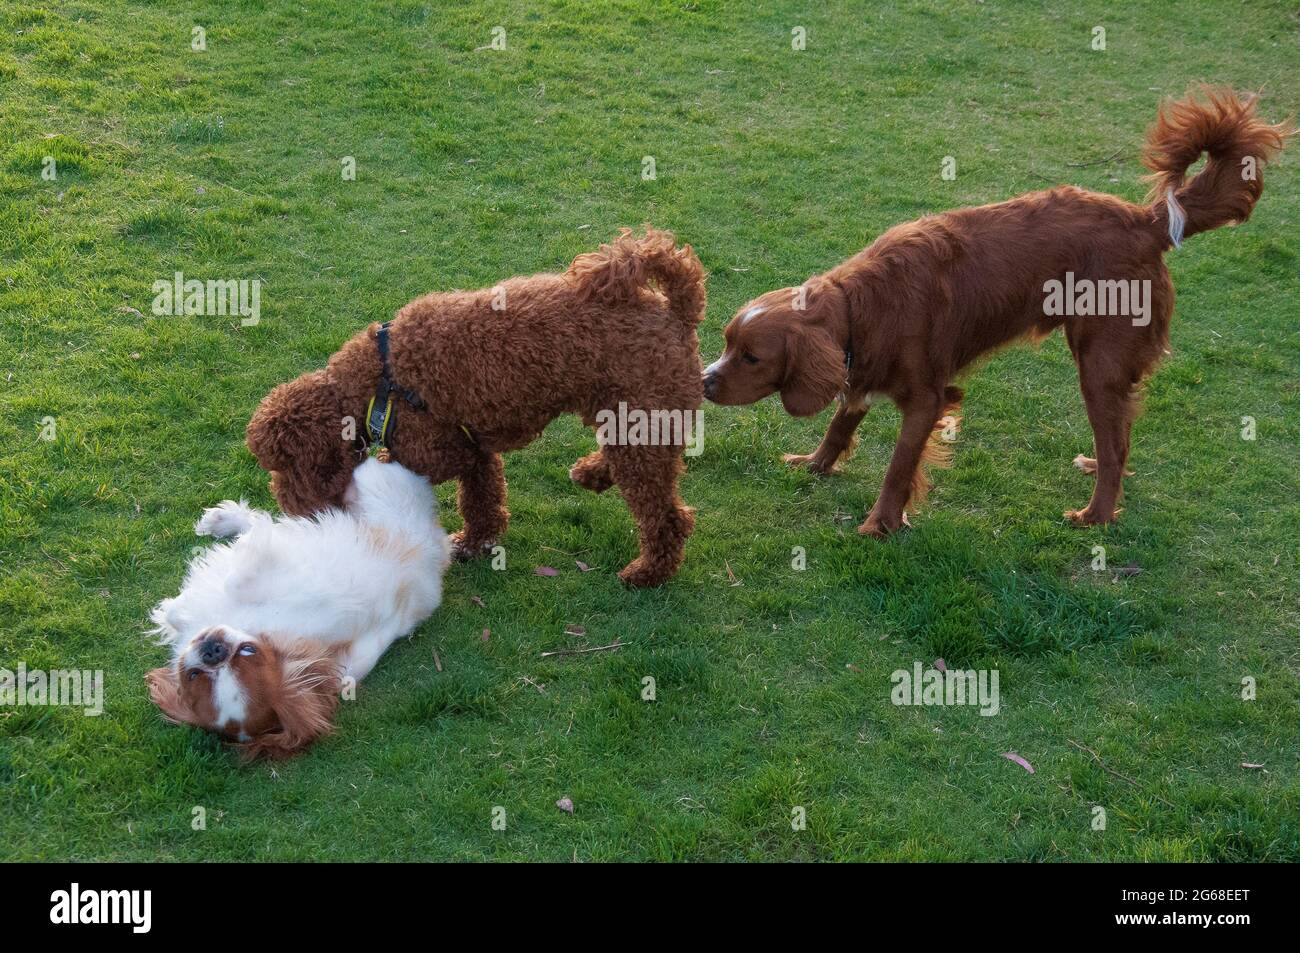 Three dogs of different breeds - King Charles Spaniel, Labradoodle and Nova Scotia Duck Tolling Retriever -  socialising at a public park Stock Photo